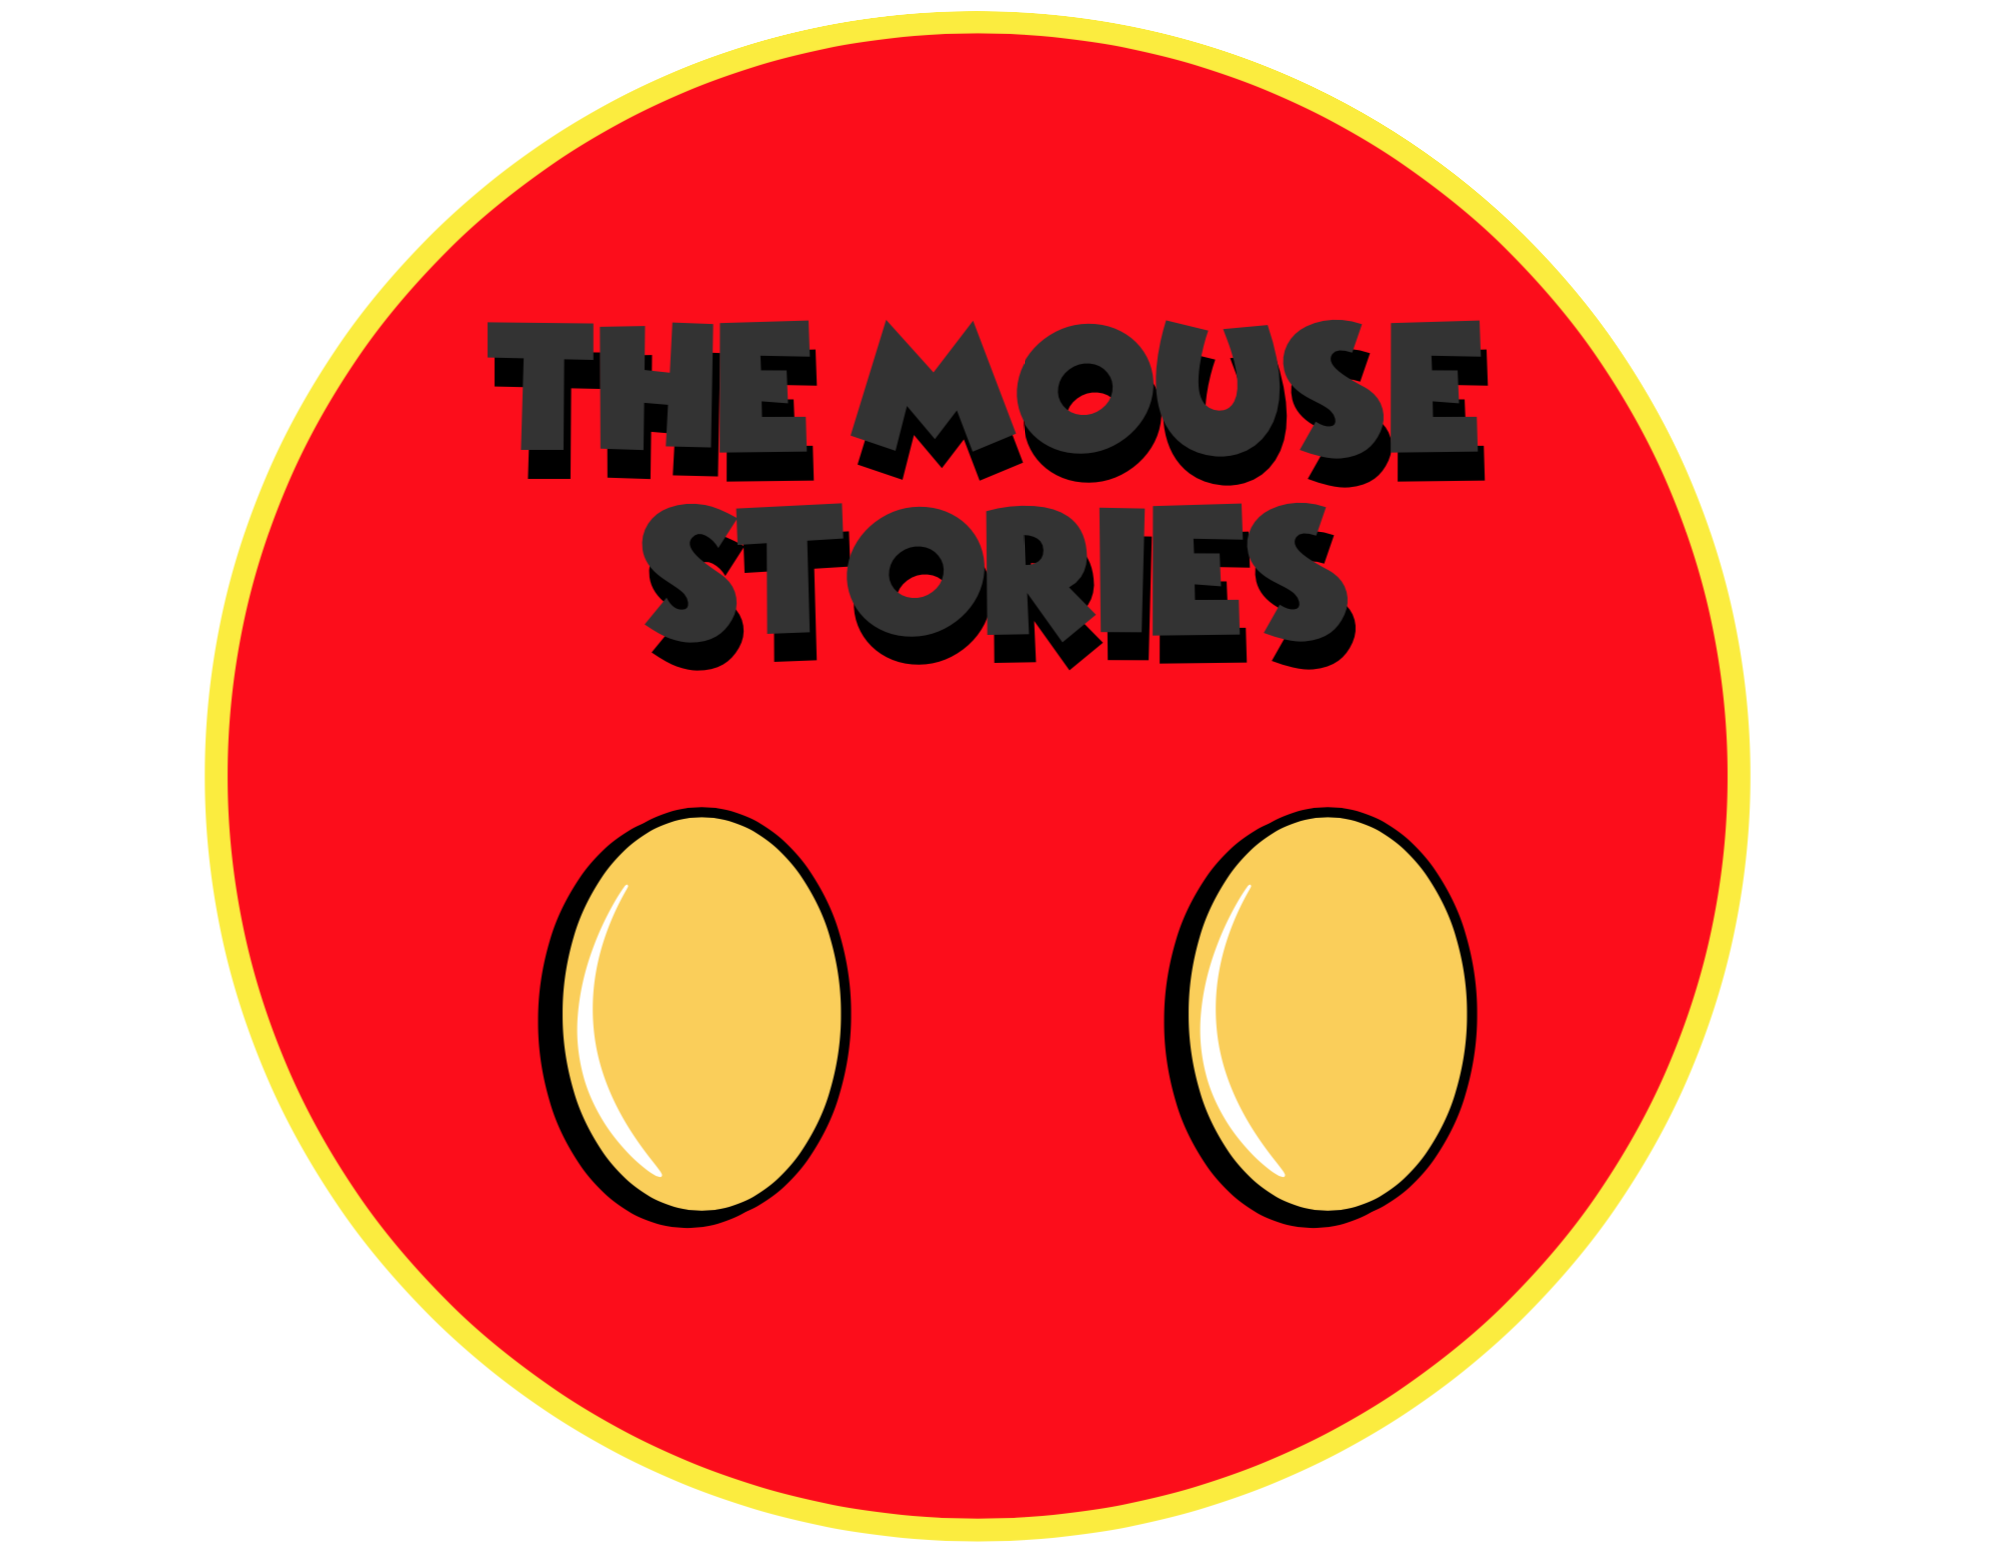 The Mouse Stories